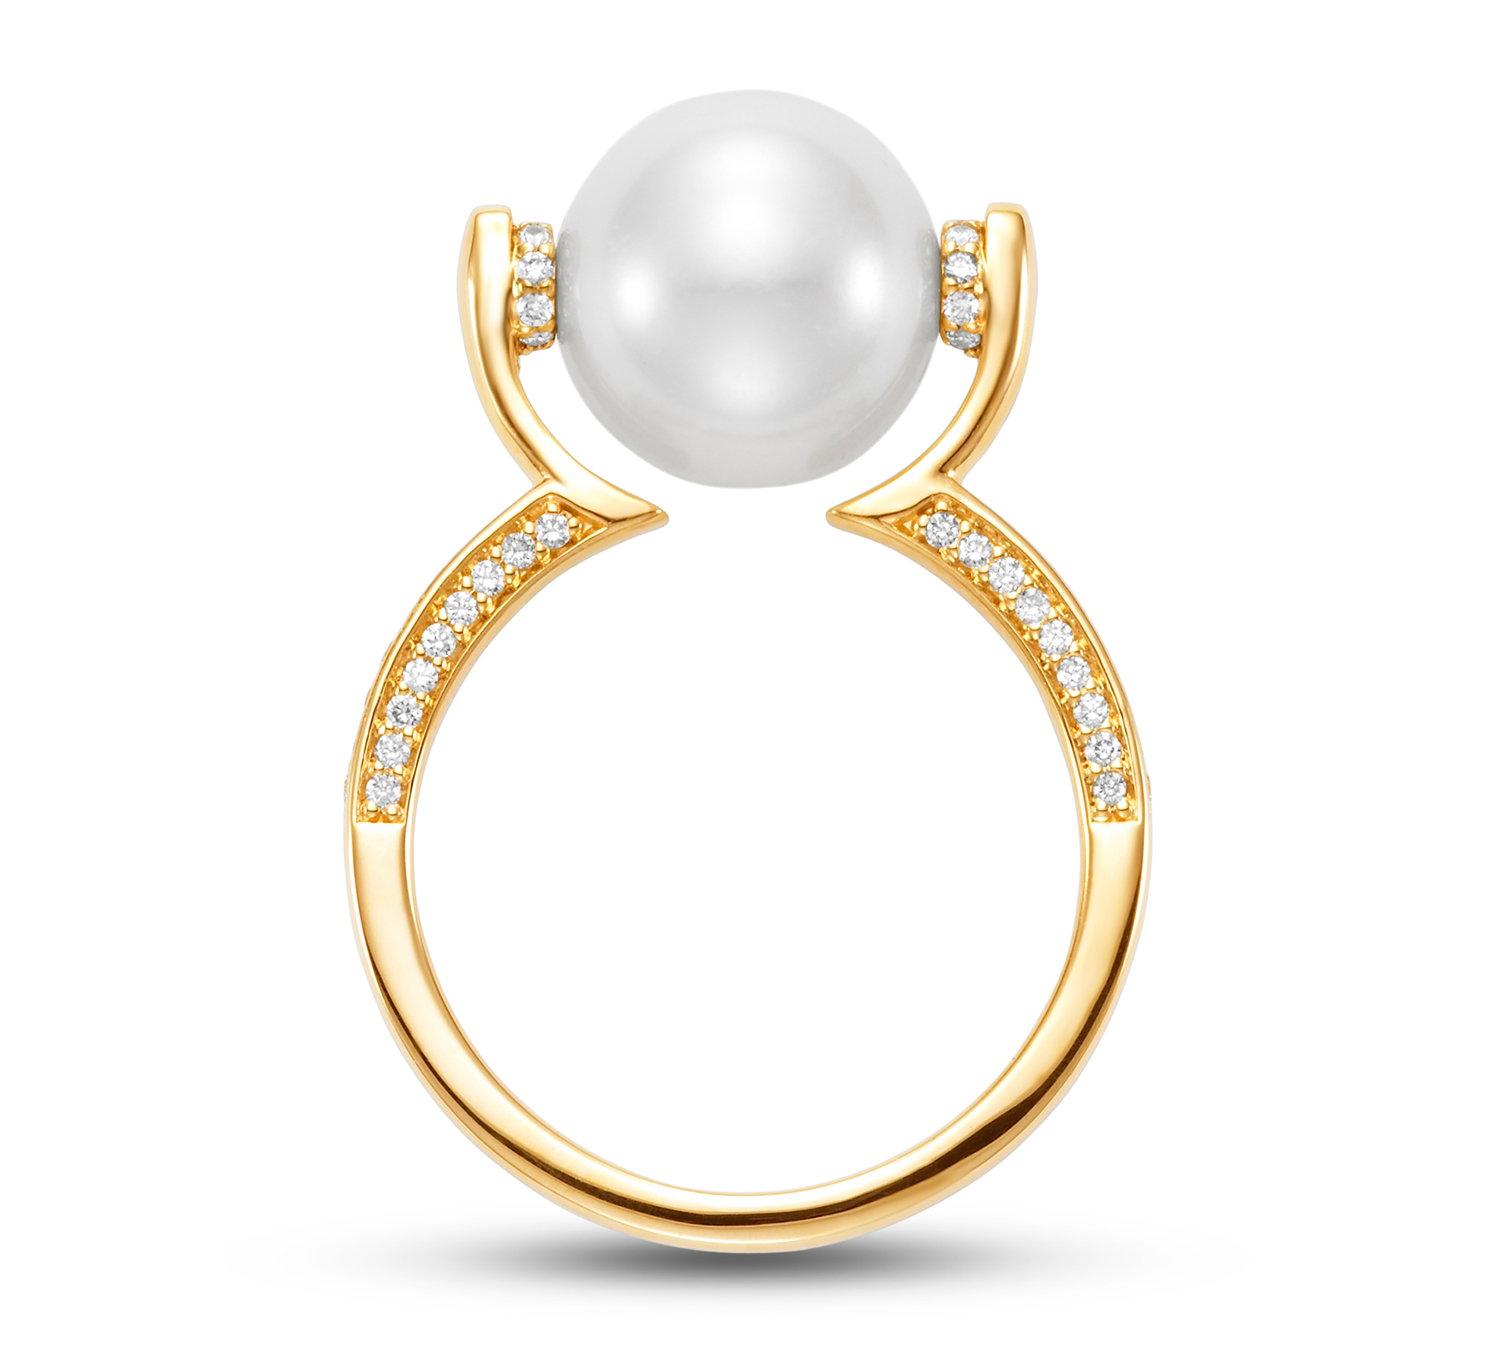 INSTORE Design Awards 2022 &#8211; Pearl Jewelry Under $5,000